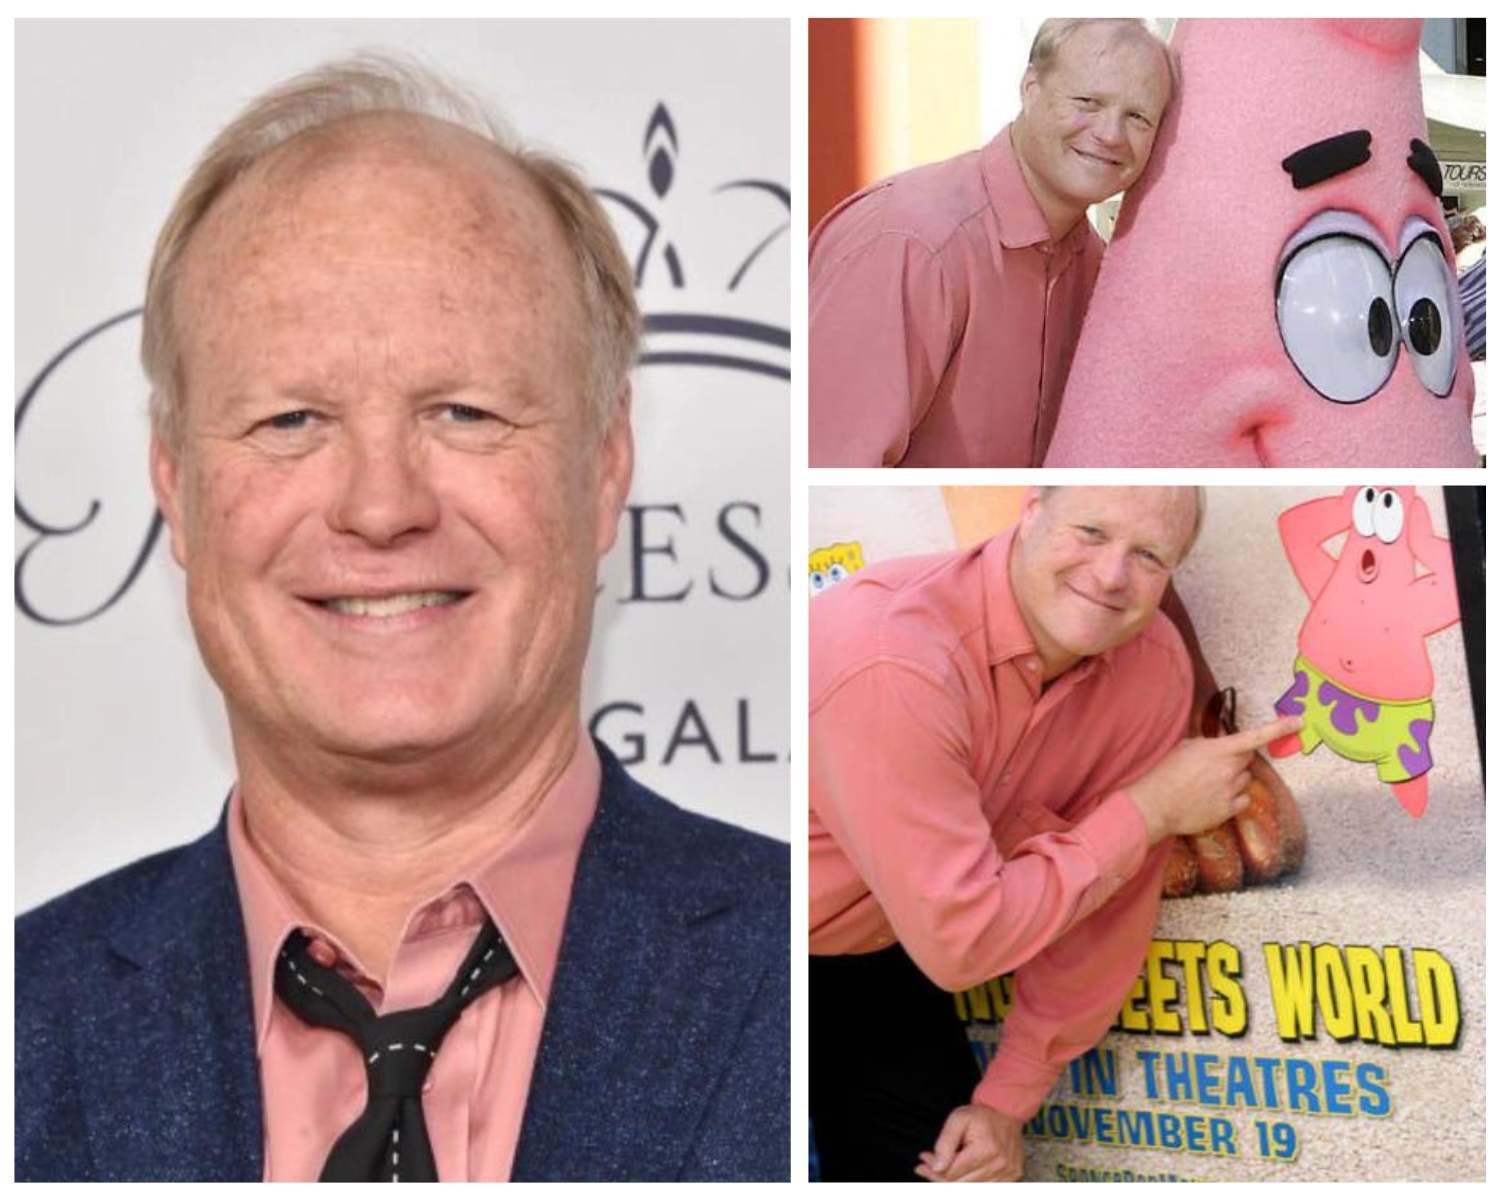 Bill Fagerbakke, the voice of Patrick Star